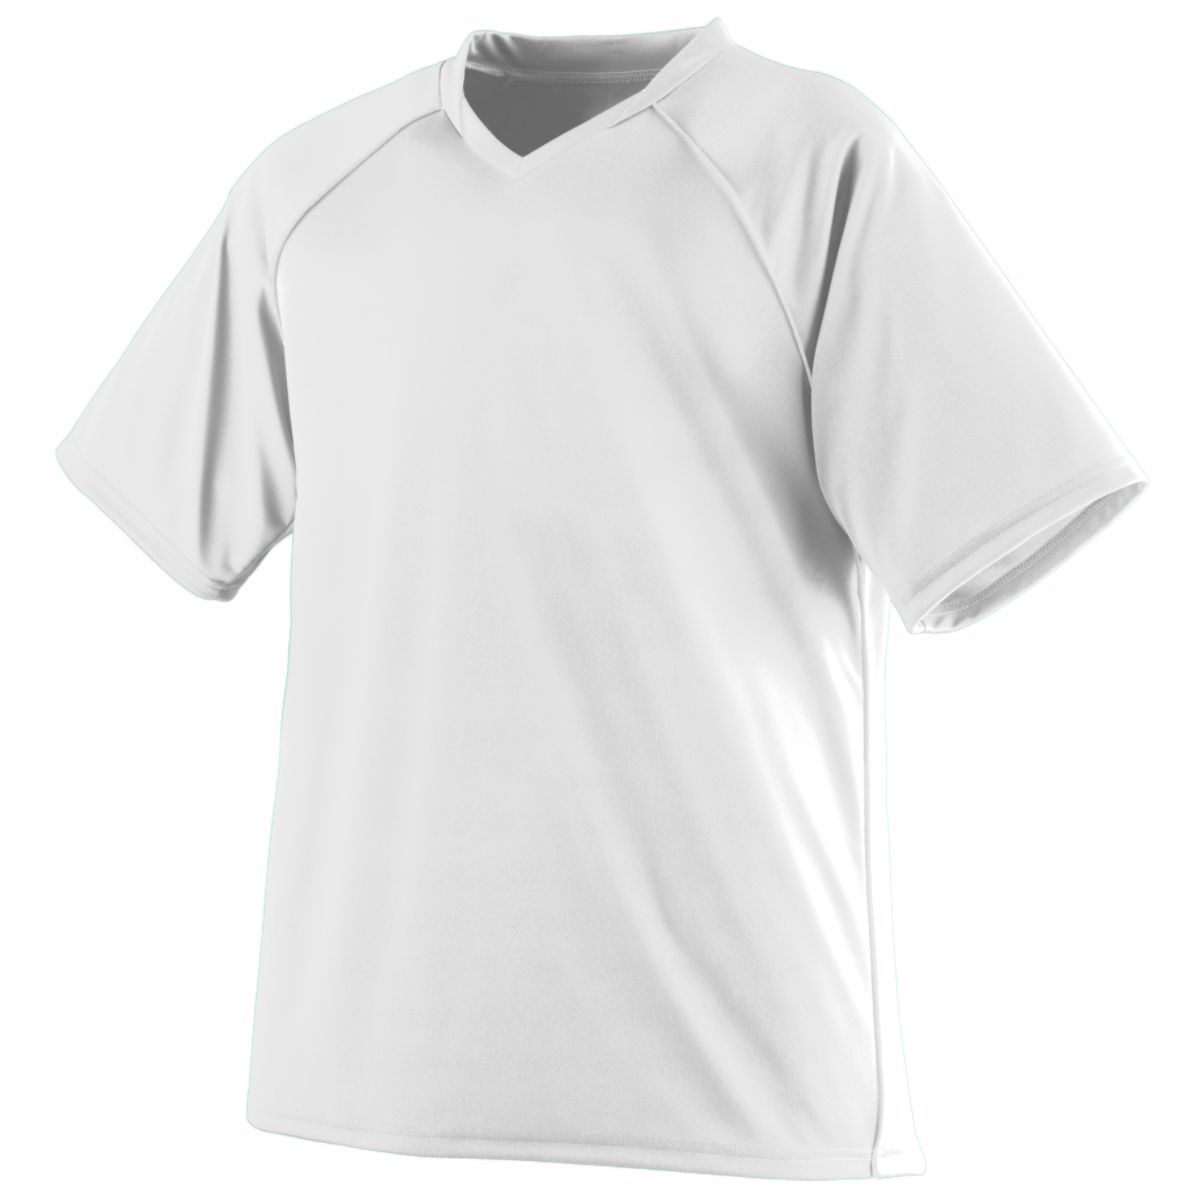 Augusta Sportswear Youth Striker Jersey in White/White  -Part of the Youth, Youth-Jersey, Augusta-Products, Soccer, Shirts, All-Sports-1 product lines at KanaleyCreations.com